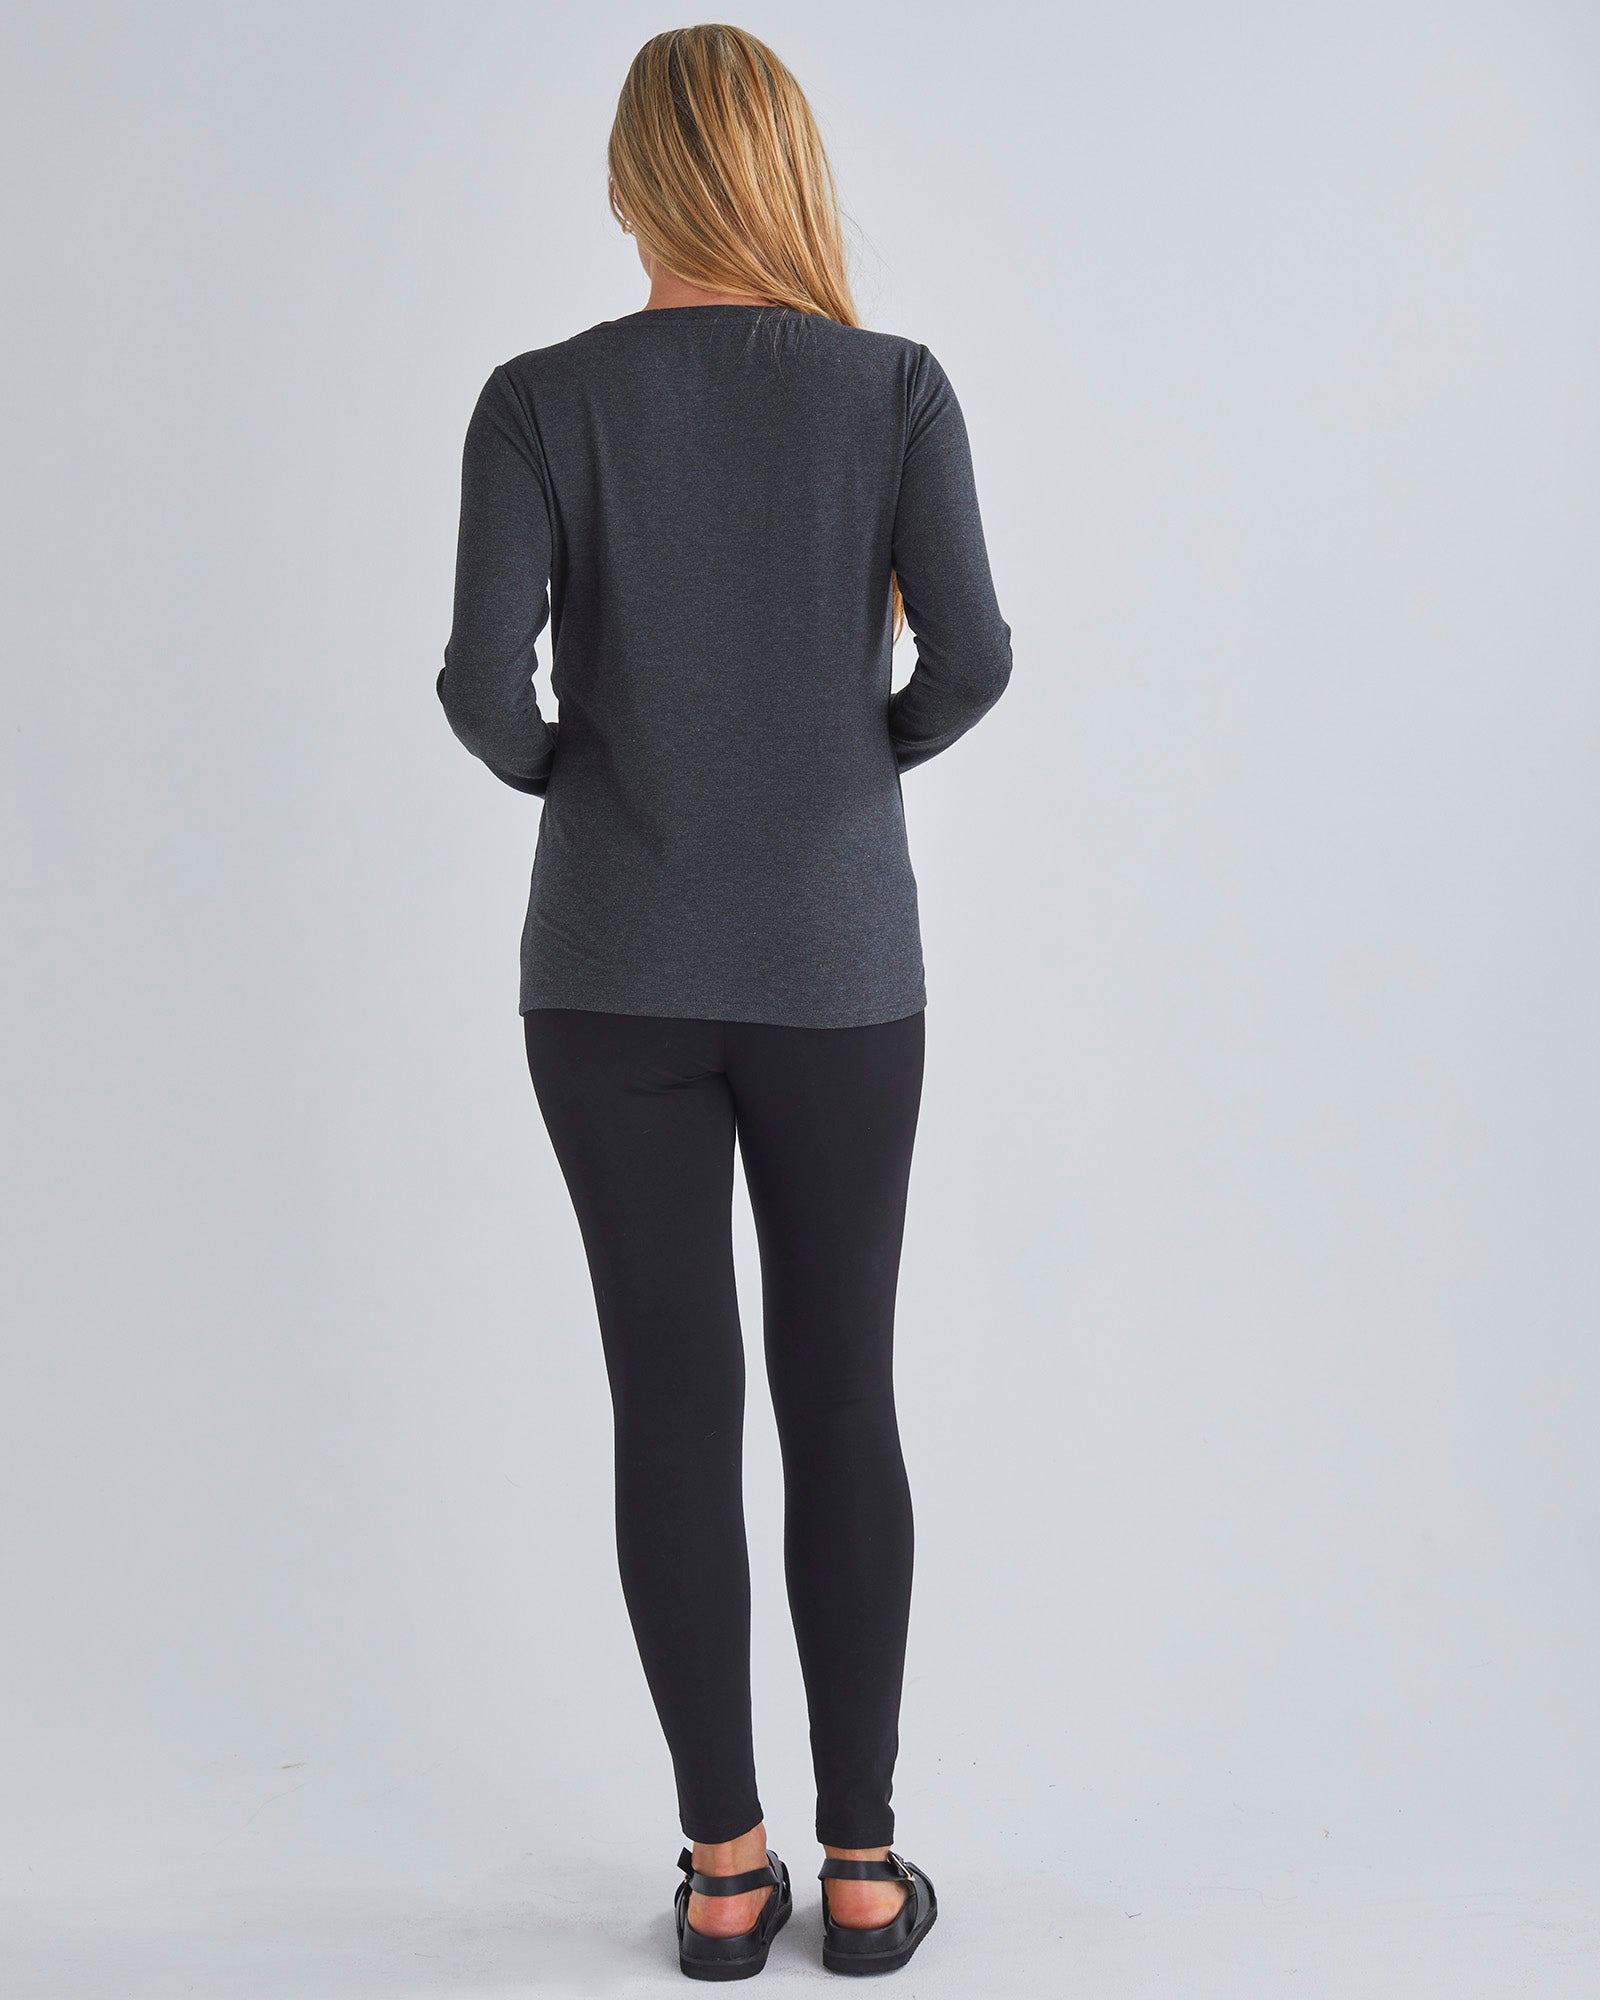 Back View - Easy Access Long Sleeve  Nursing Petal Top in Charcoal from Angel Maternity